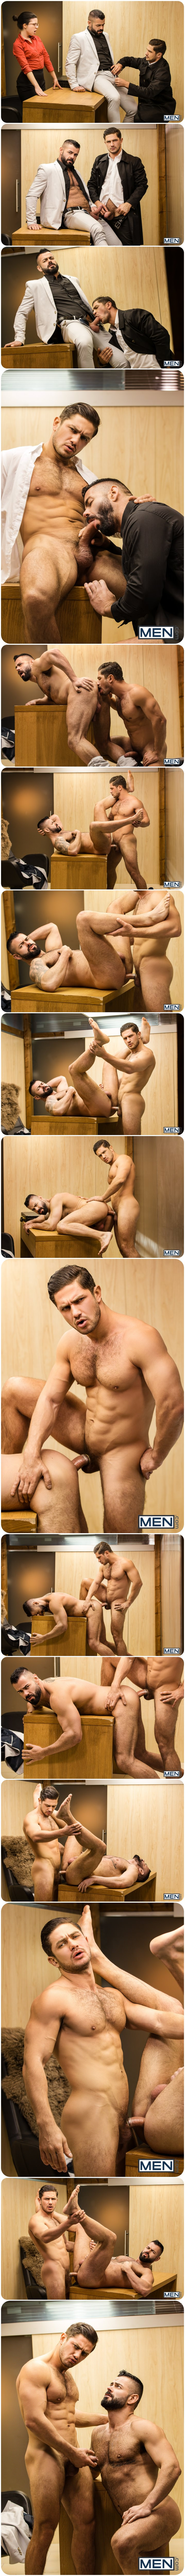 Men.com, The Gay Office, Dato Foland, Victor D'Angelo